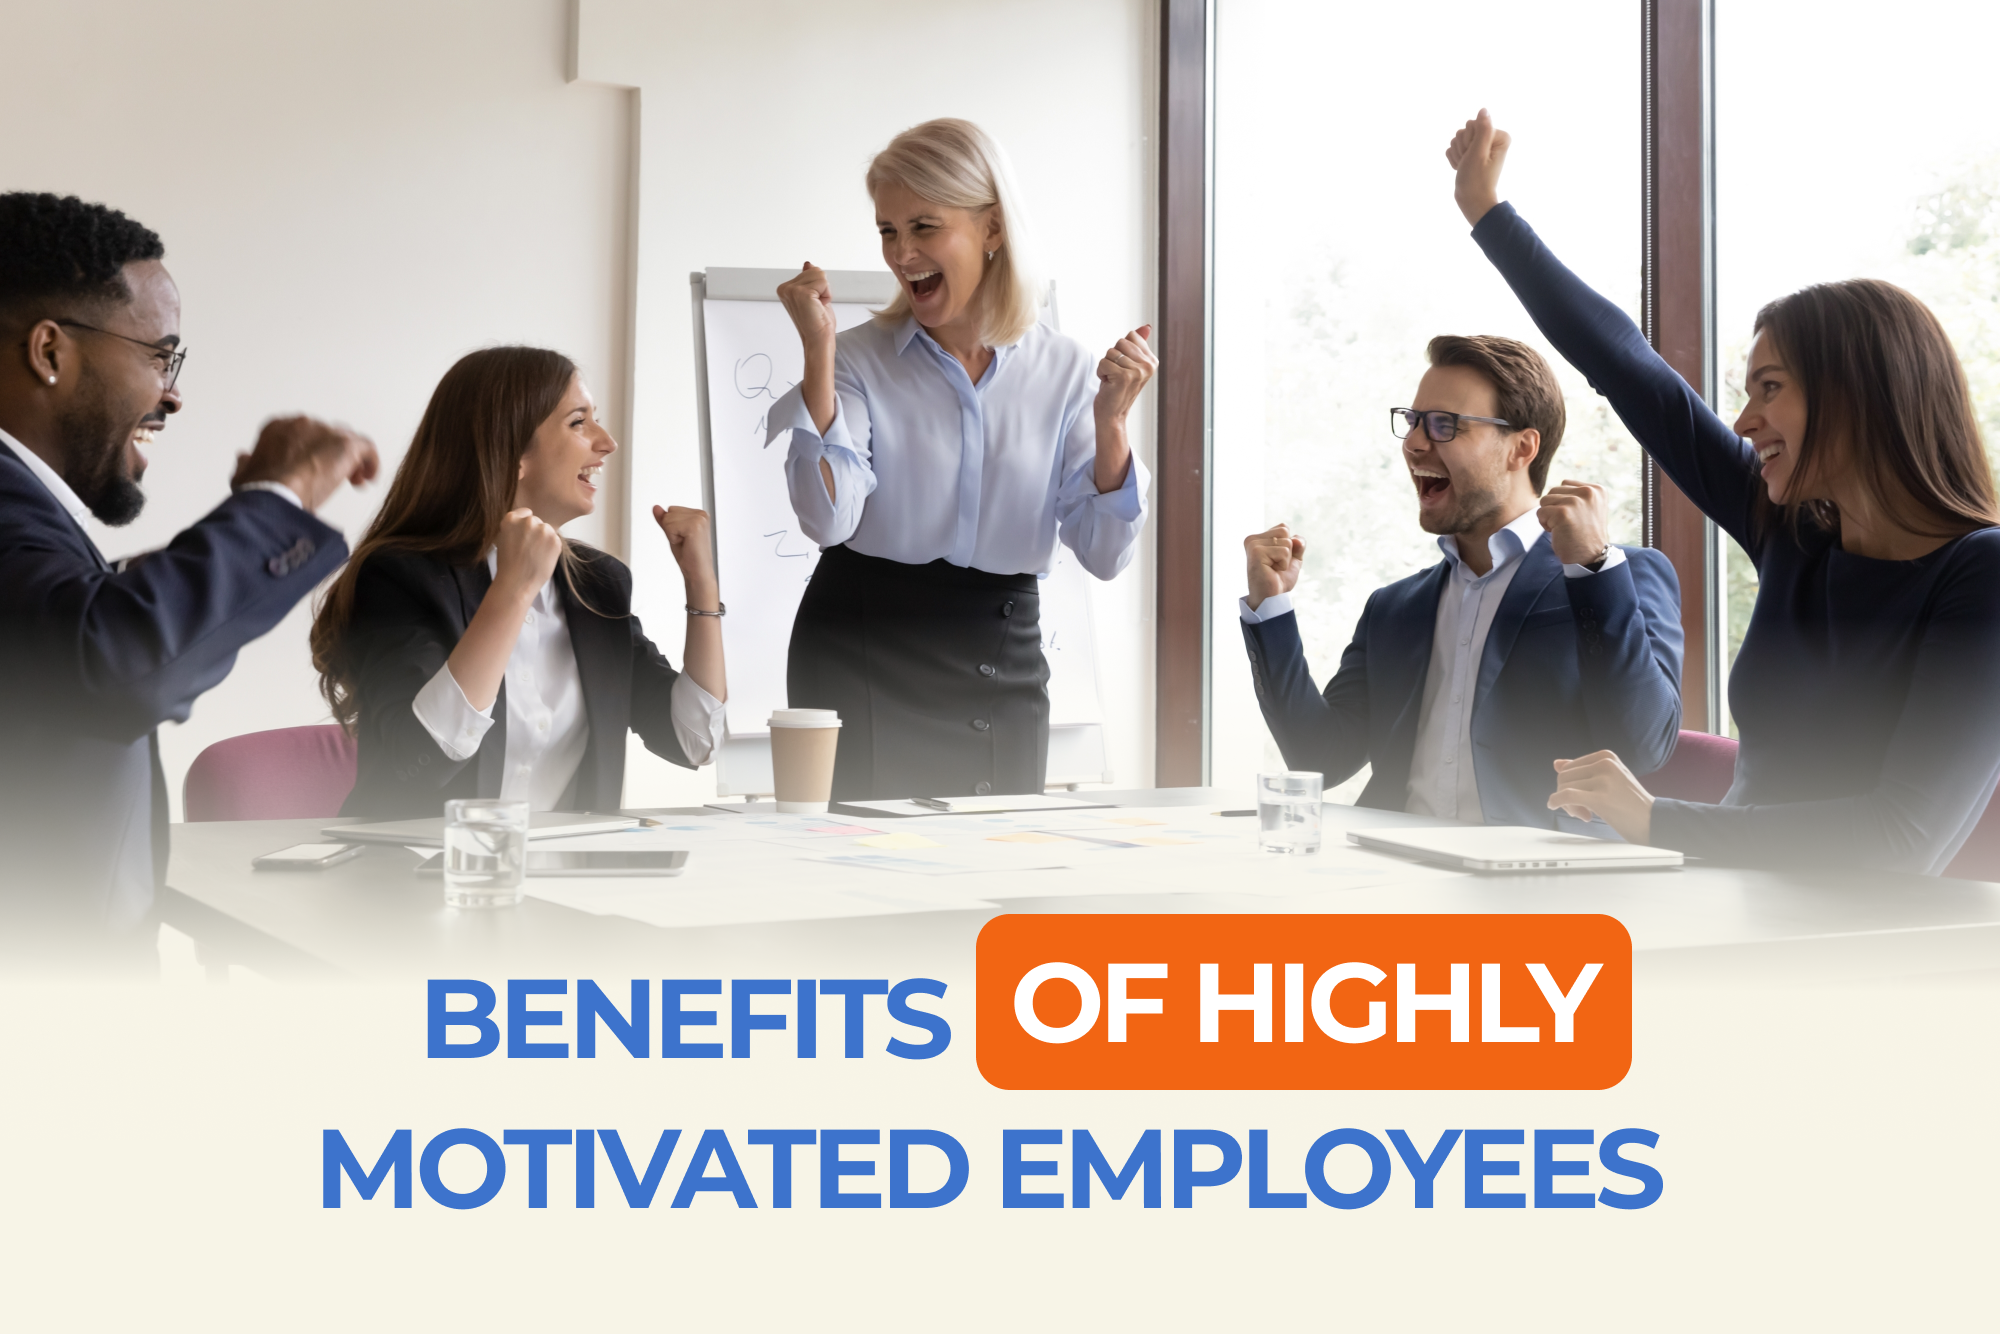 Benefits of Highly Motivated Employees